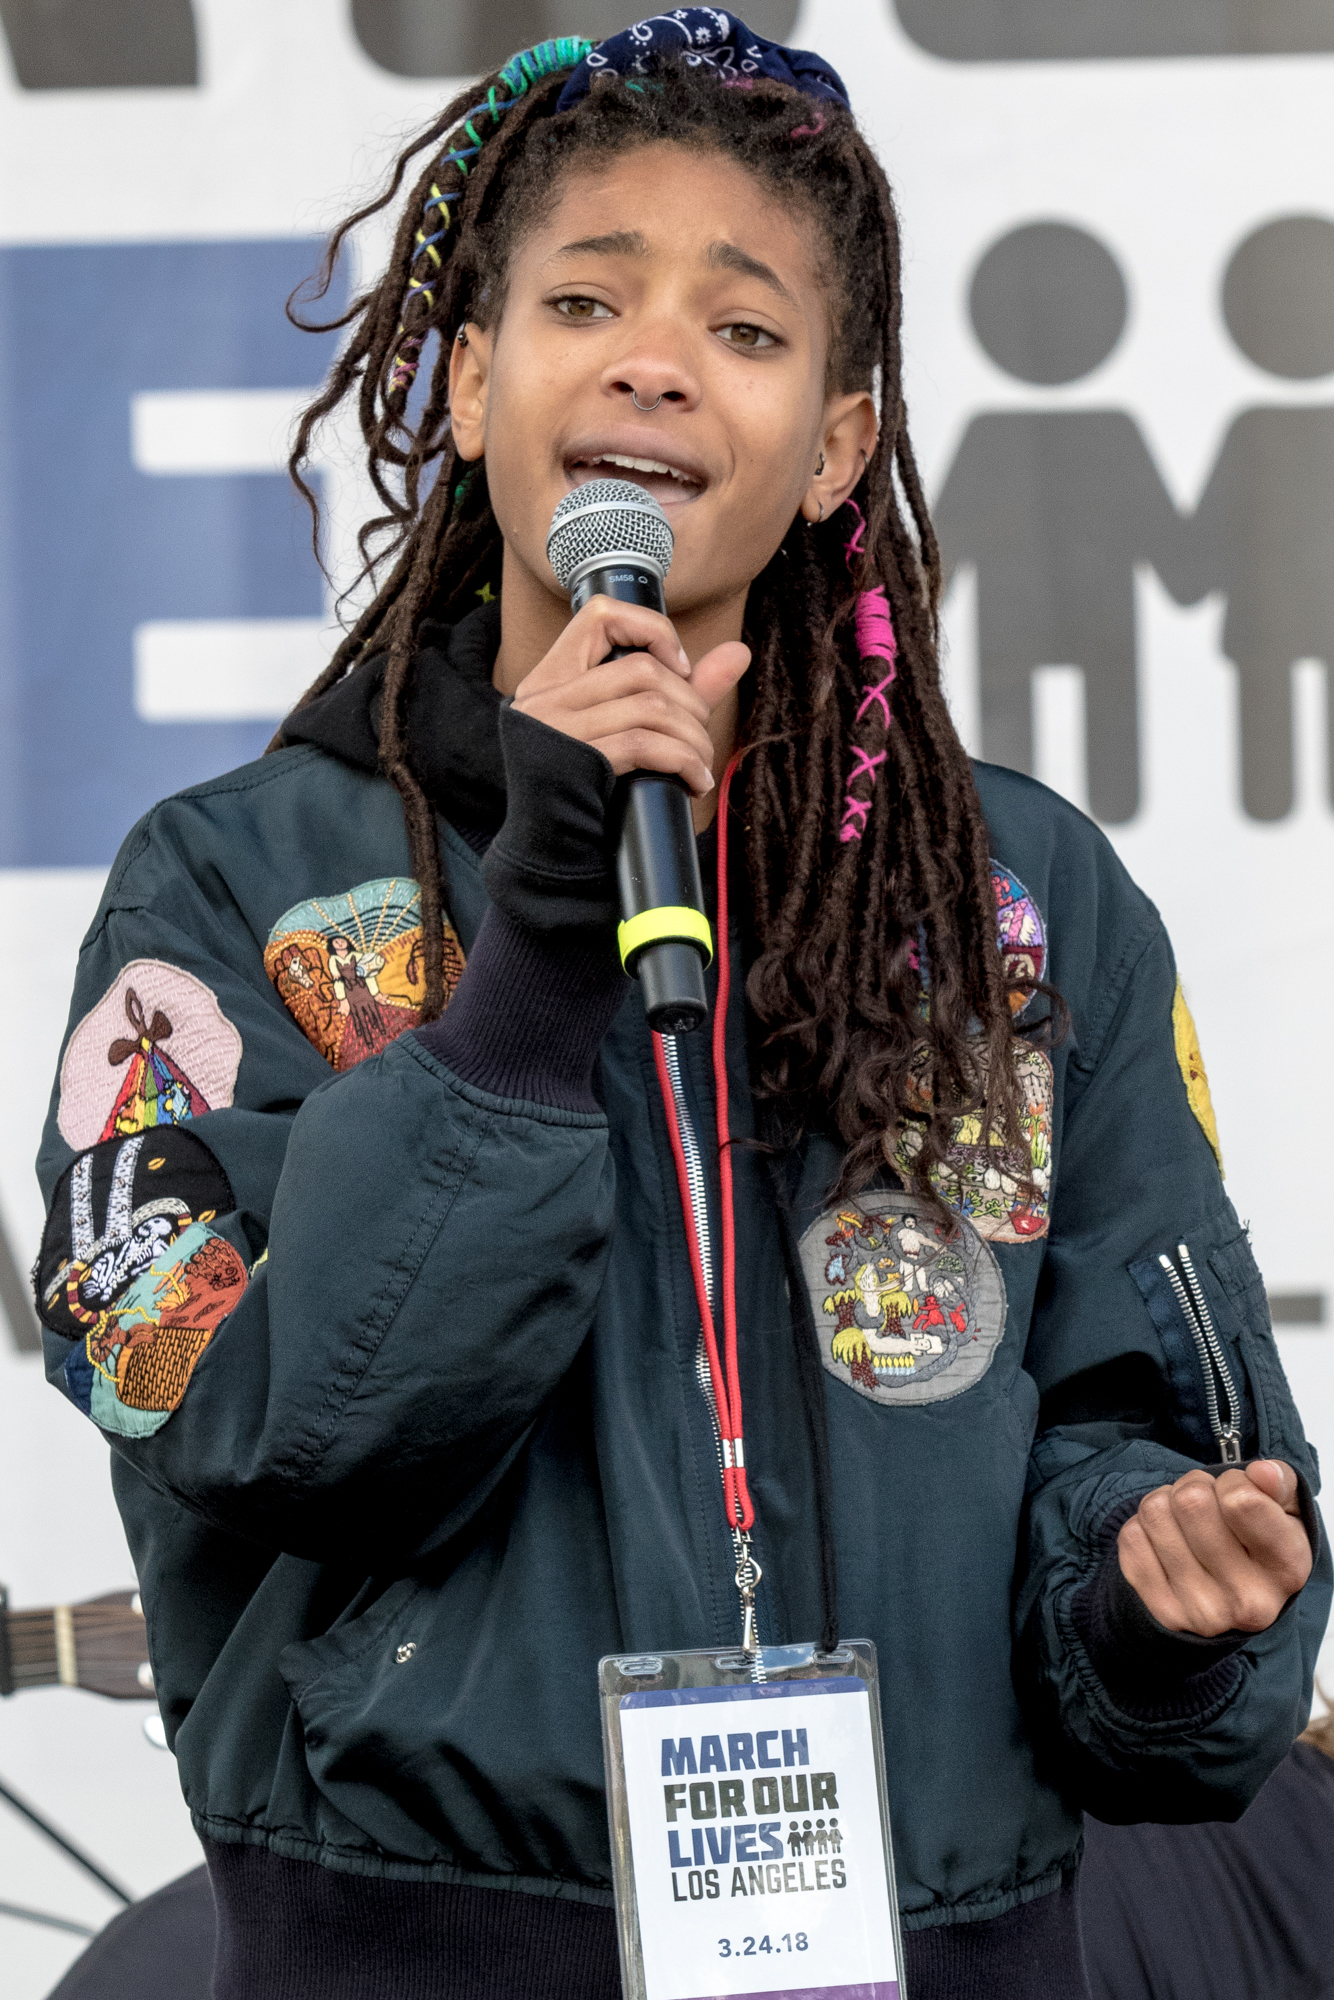  Willow Smith was one of the many celebrities who came to show support for striceter gun laws at the March For Our Lives protest on March 24, 2018 in Los Angeles, California. (Zane Meyer-Thornton/Corsair Photo) 